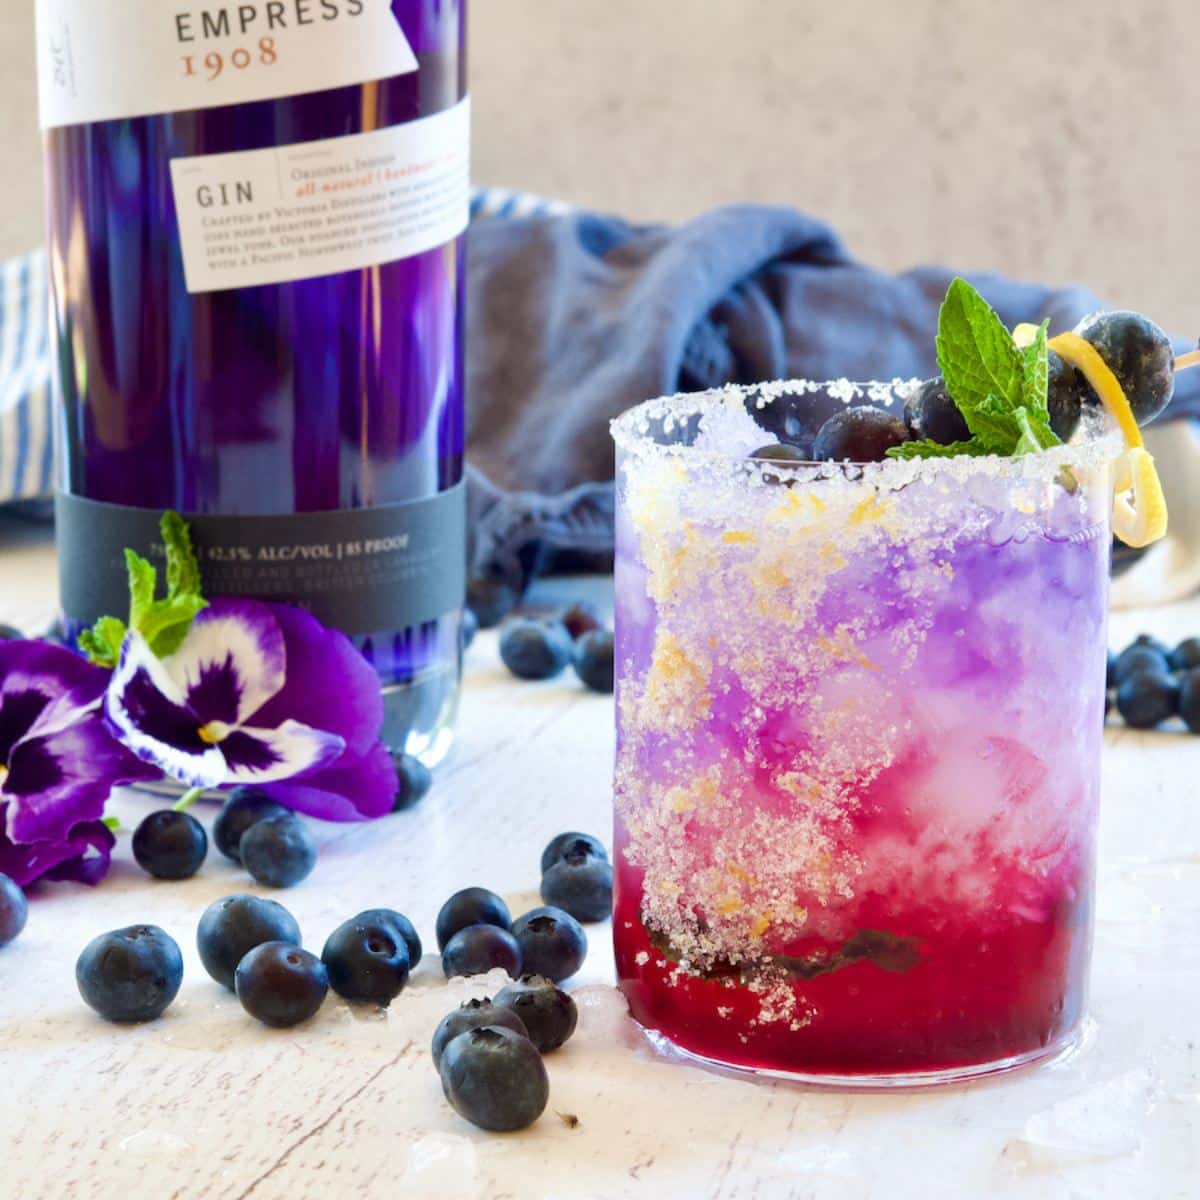 Blueberry Gin Cocktail made with Empress Gin 1908.